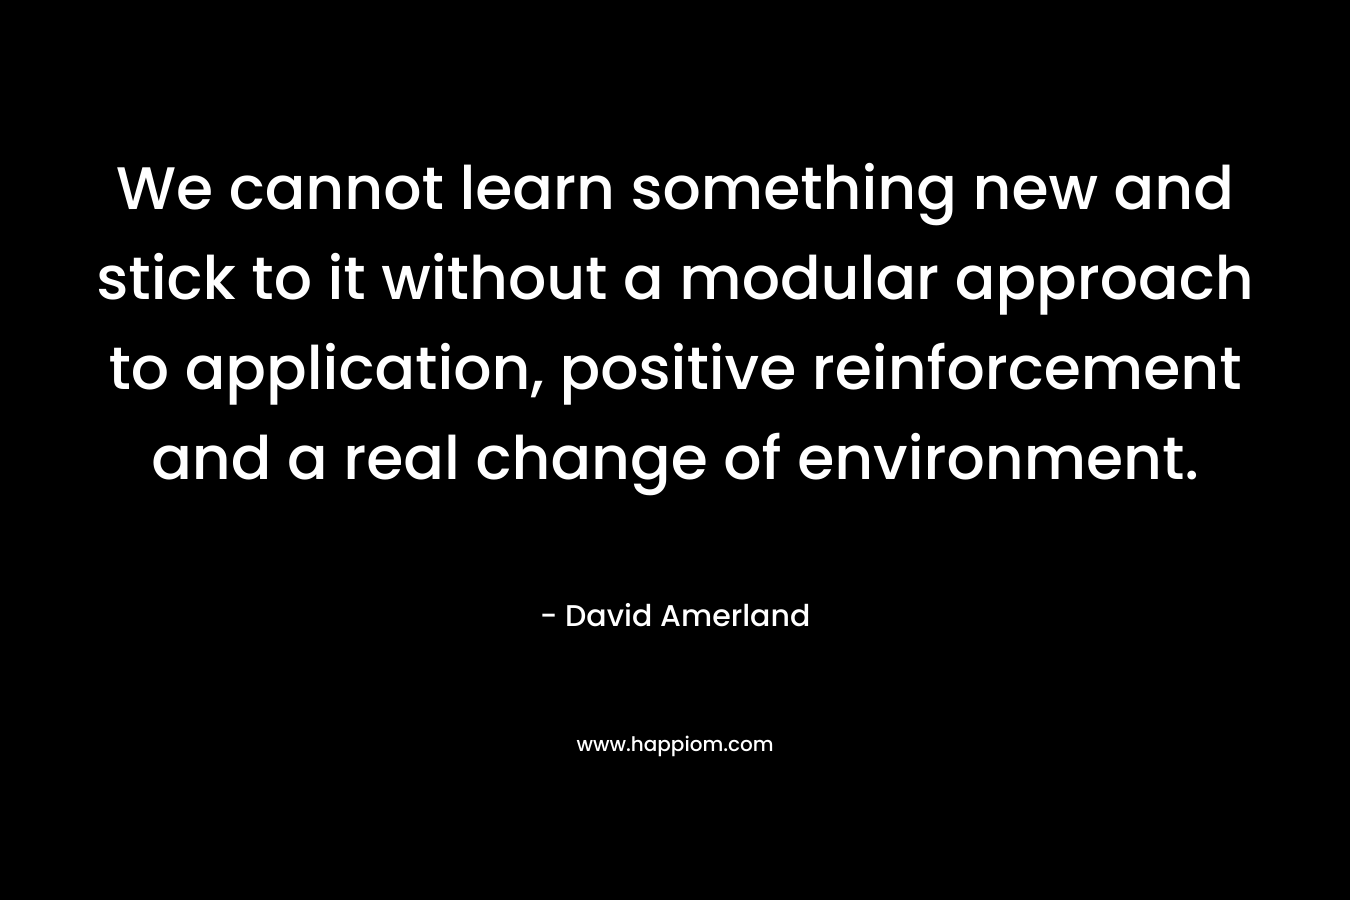 We cannot learn something new and stick to it without a modular approach to application, positive reinforcement and a real change of environment. – David Amerland